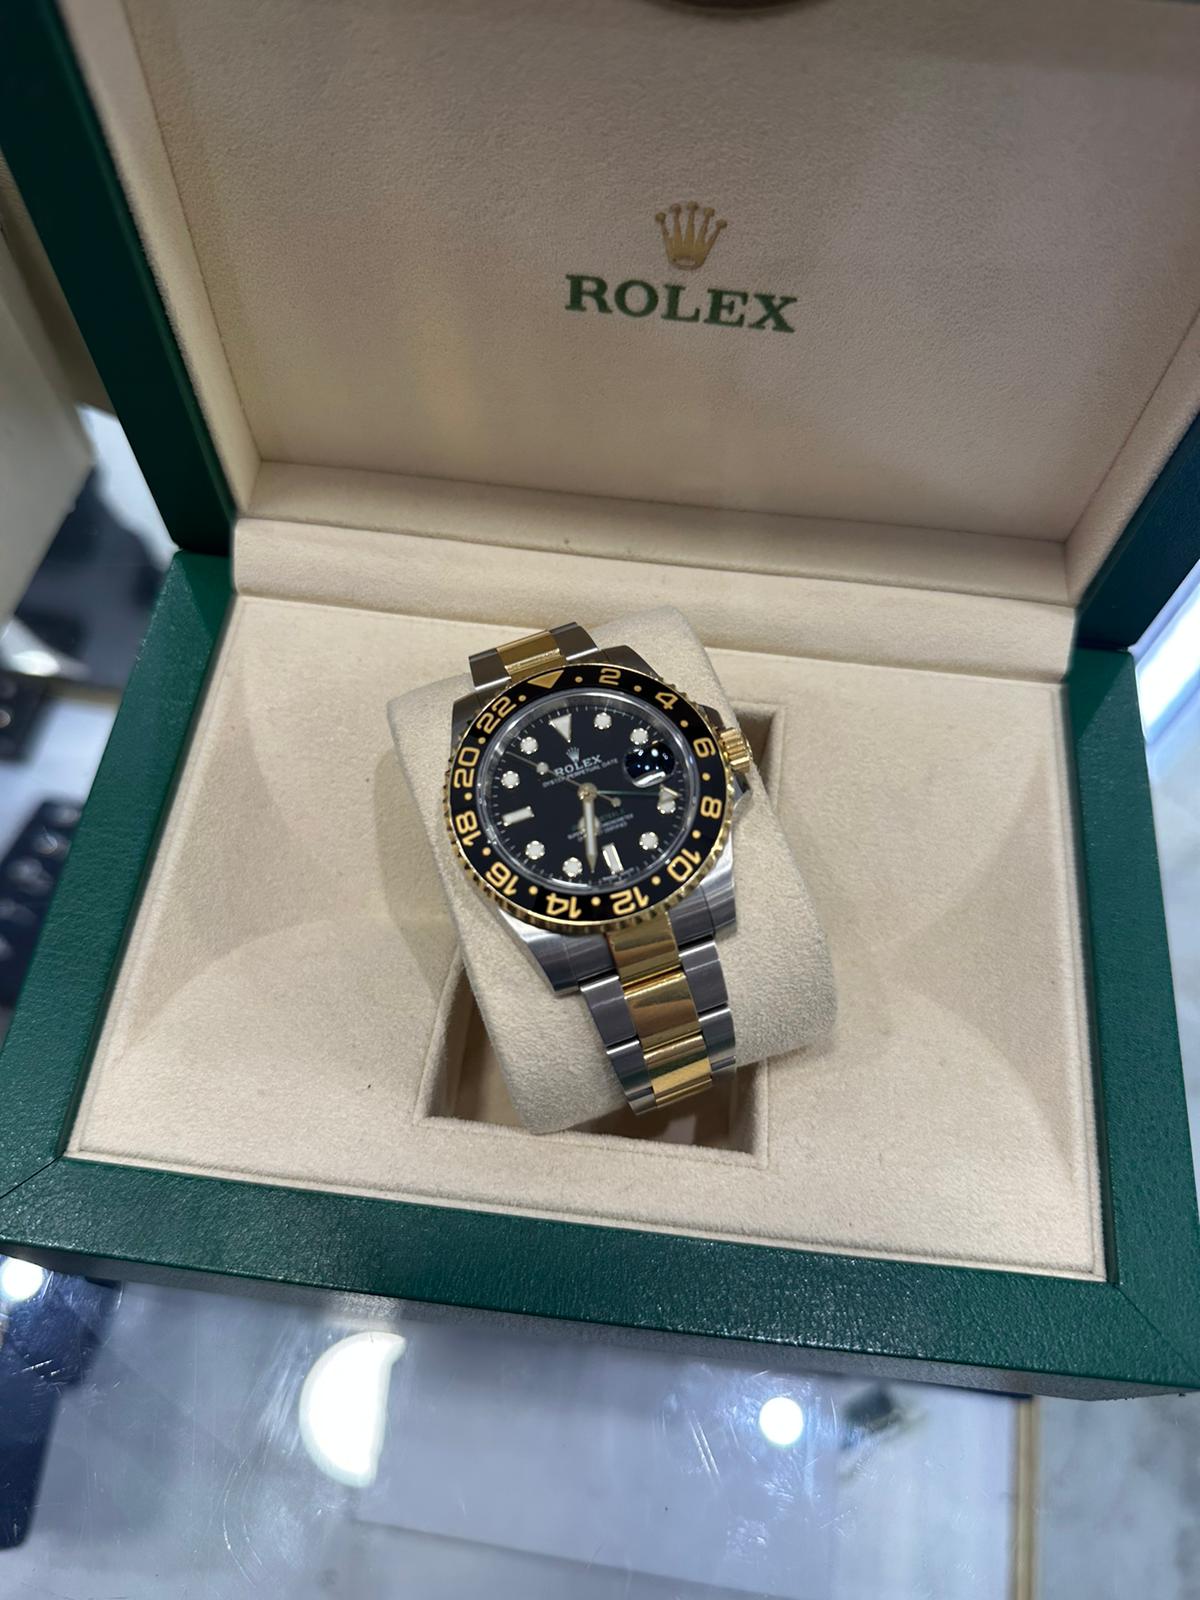 Rolex GMT-Master II steel and gold - 116713LN disc - Image 3 of 11